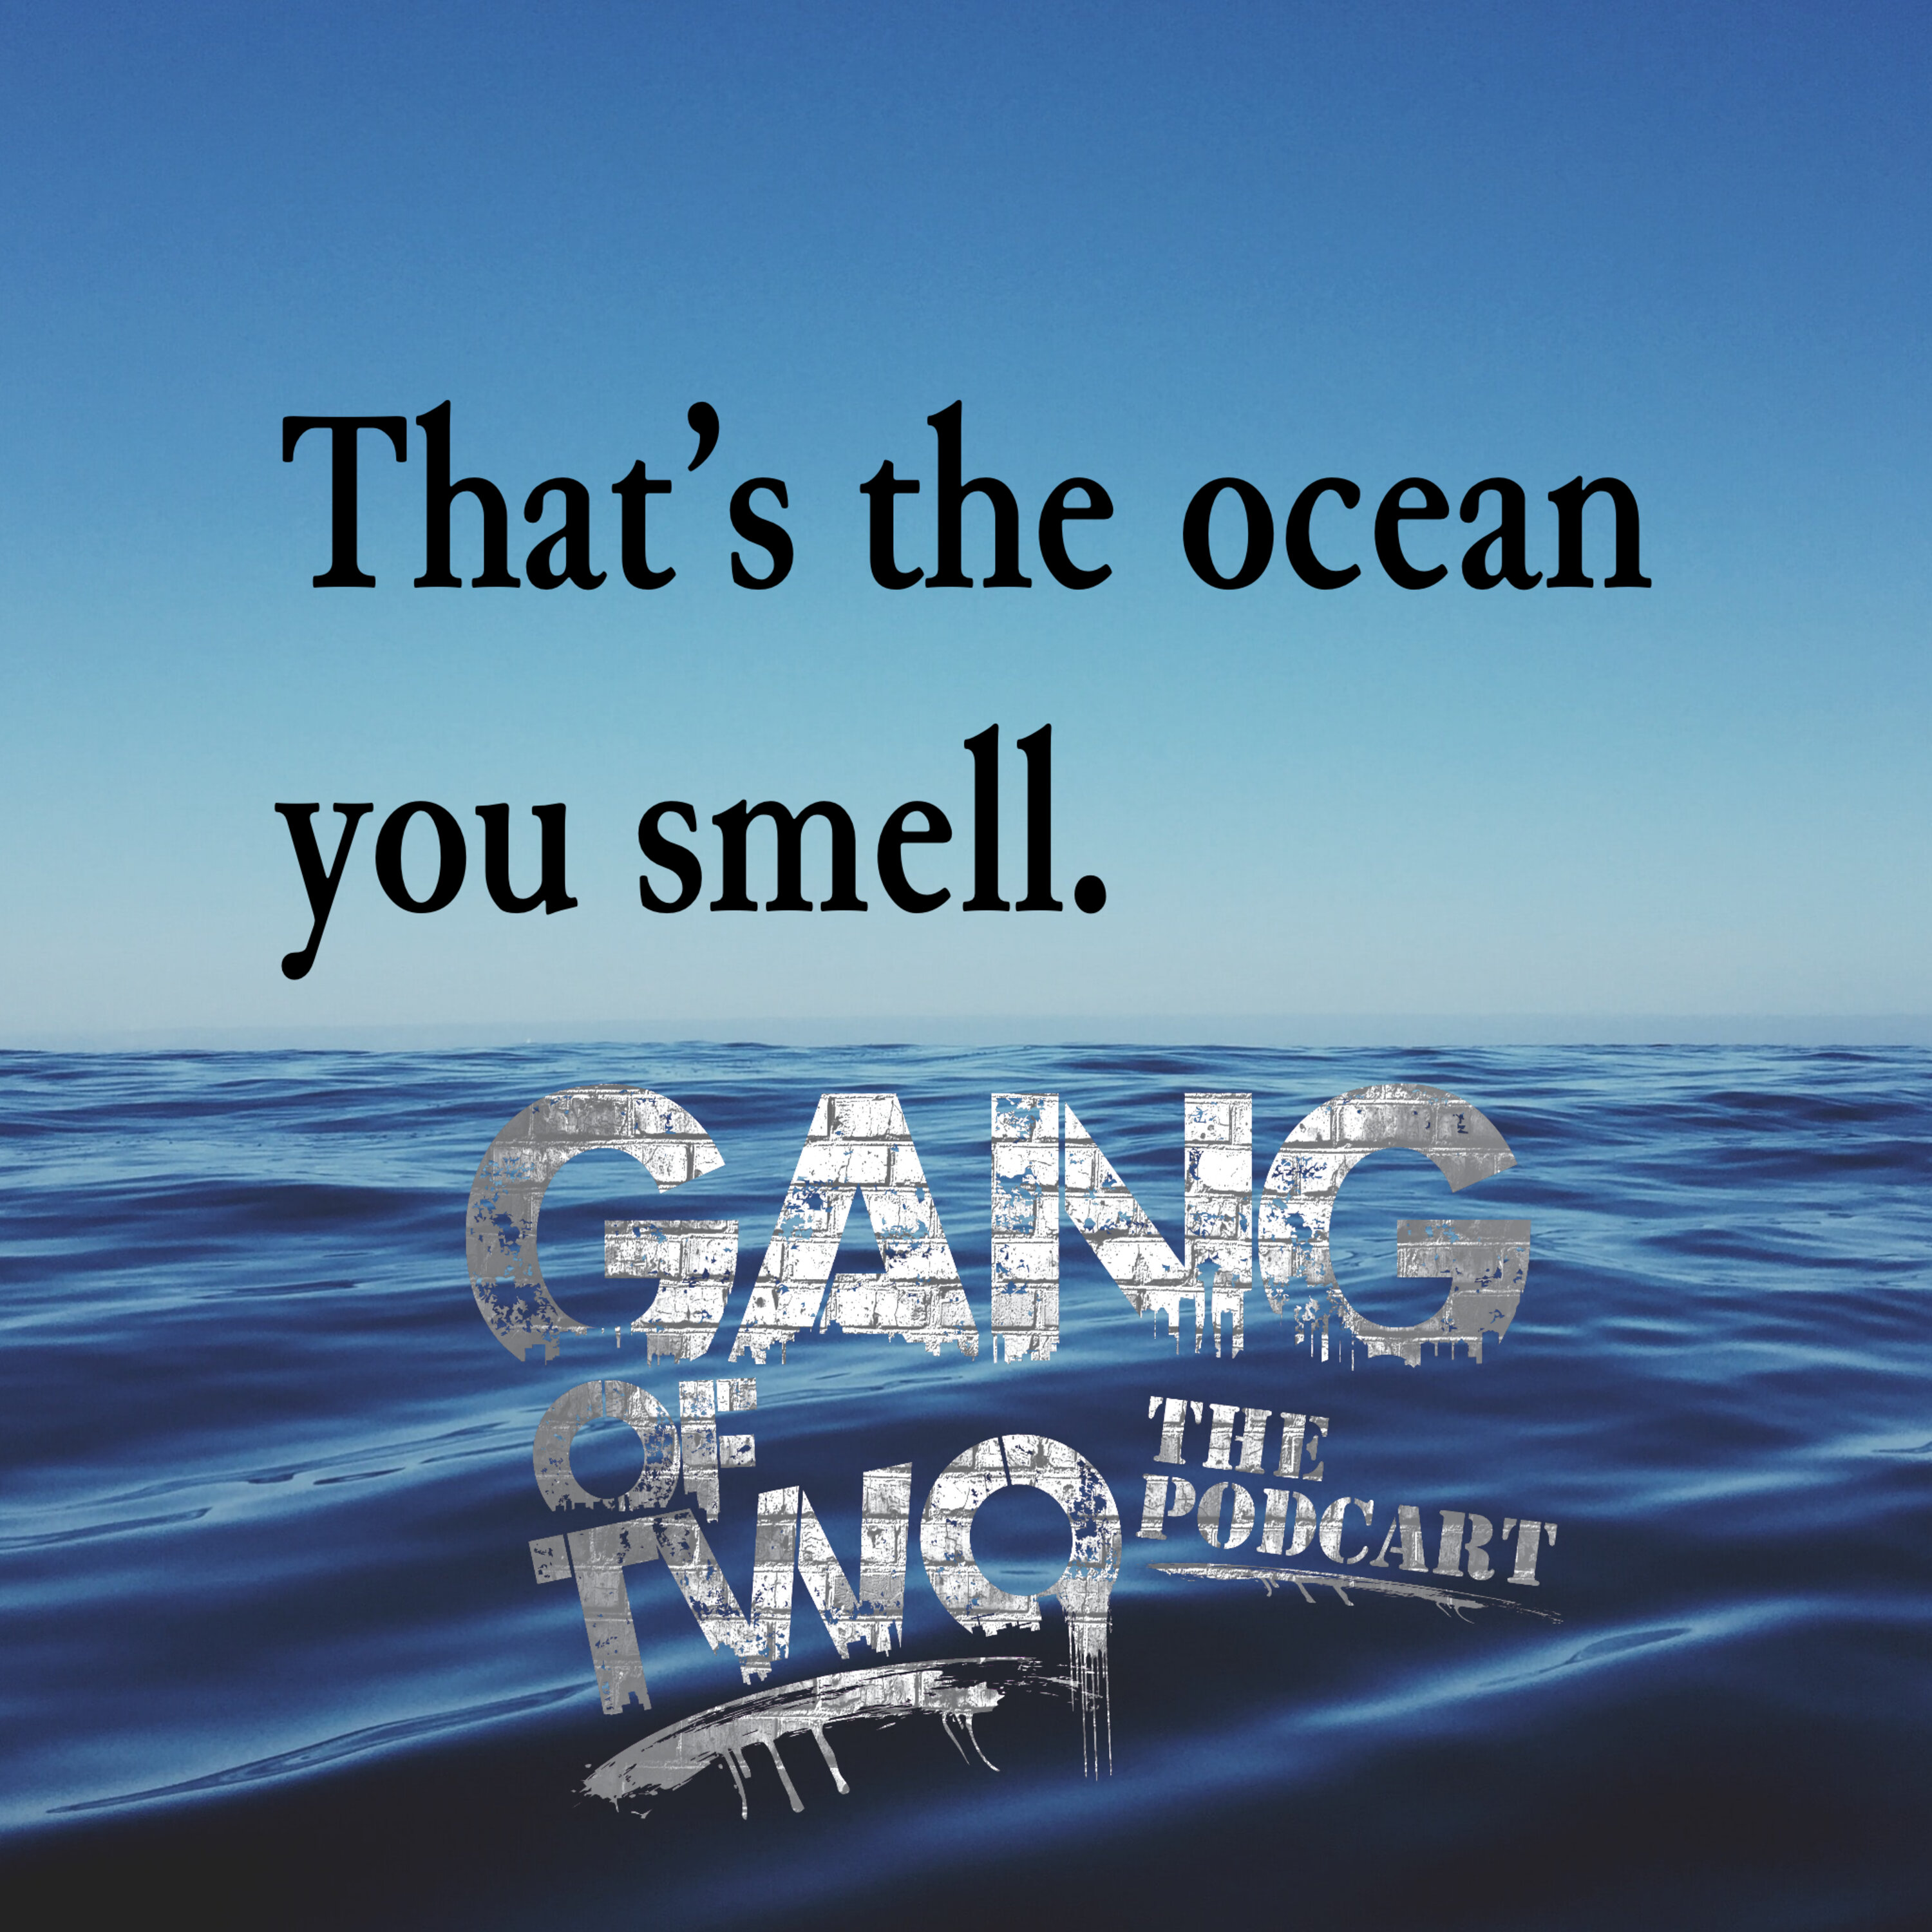 THAT'S THE OCEAN YOU SMELL Image